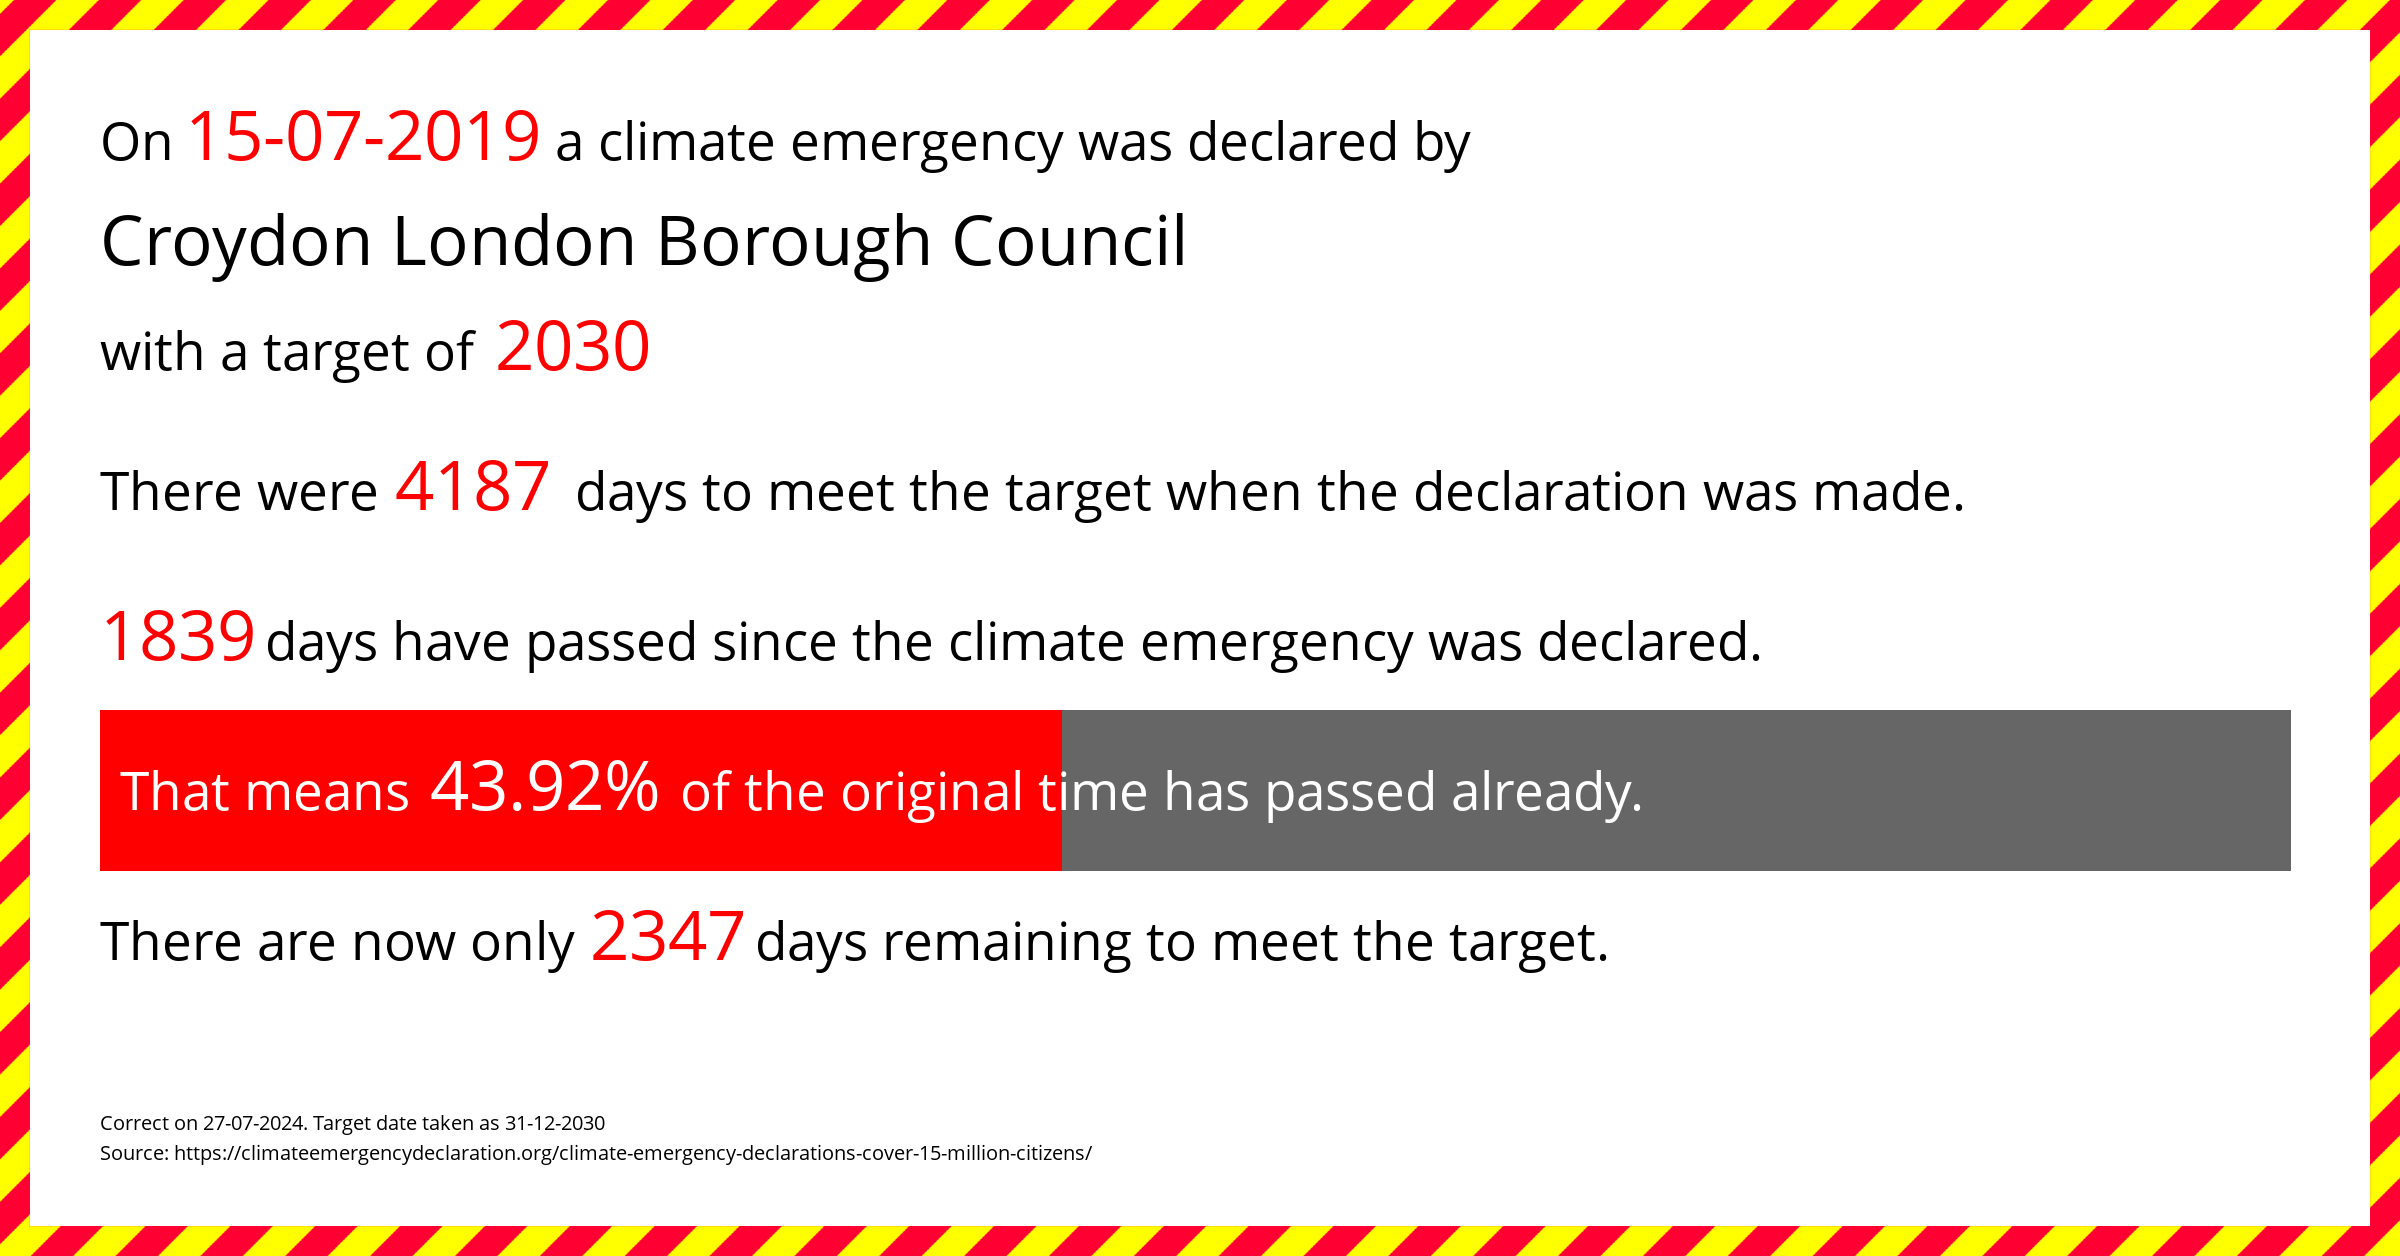 Croydon London Borough Council declared a Climate emergency on Monday 15th July 2019, with a target of 2030.